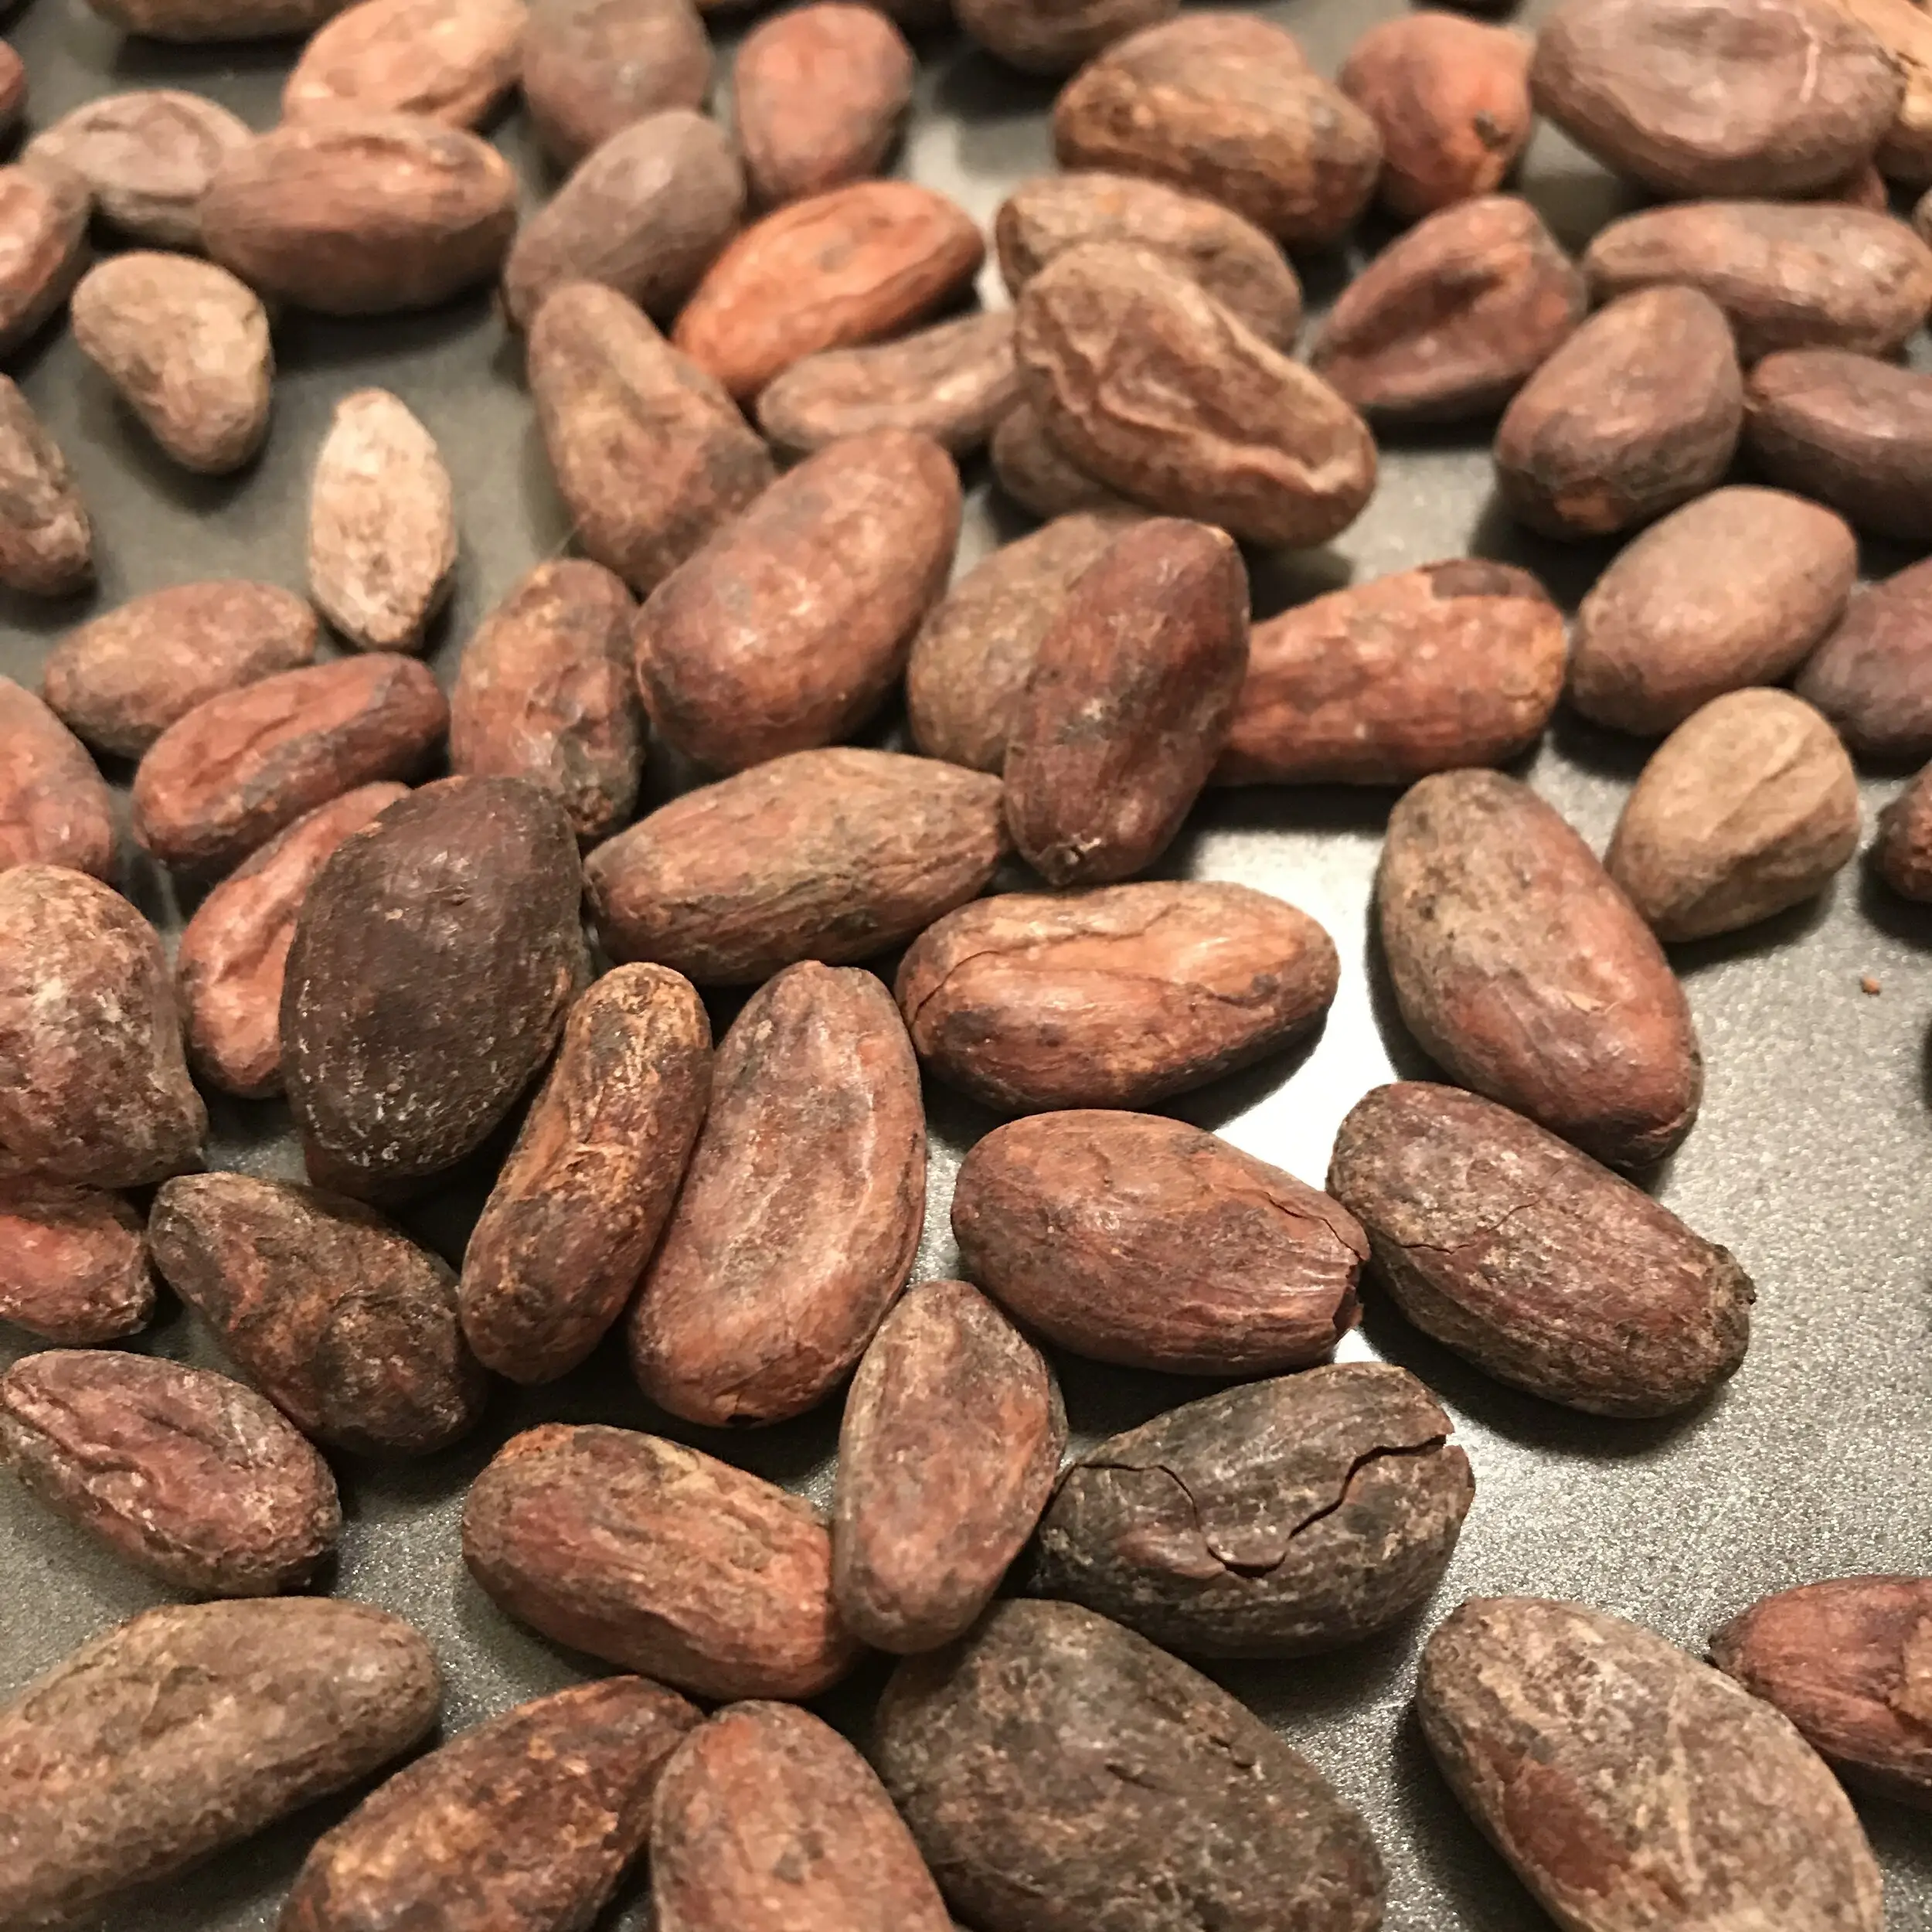 Wholesale New Beans Price Pure Quality Natural Organic Bulk Dry Cocoa Beans for Sale/ Chocolate / Beans/ Powder